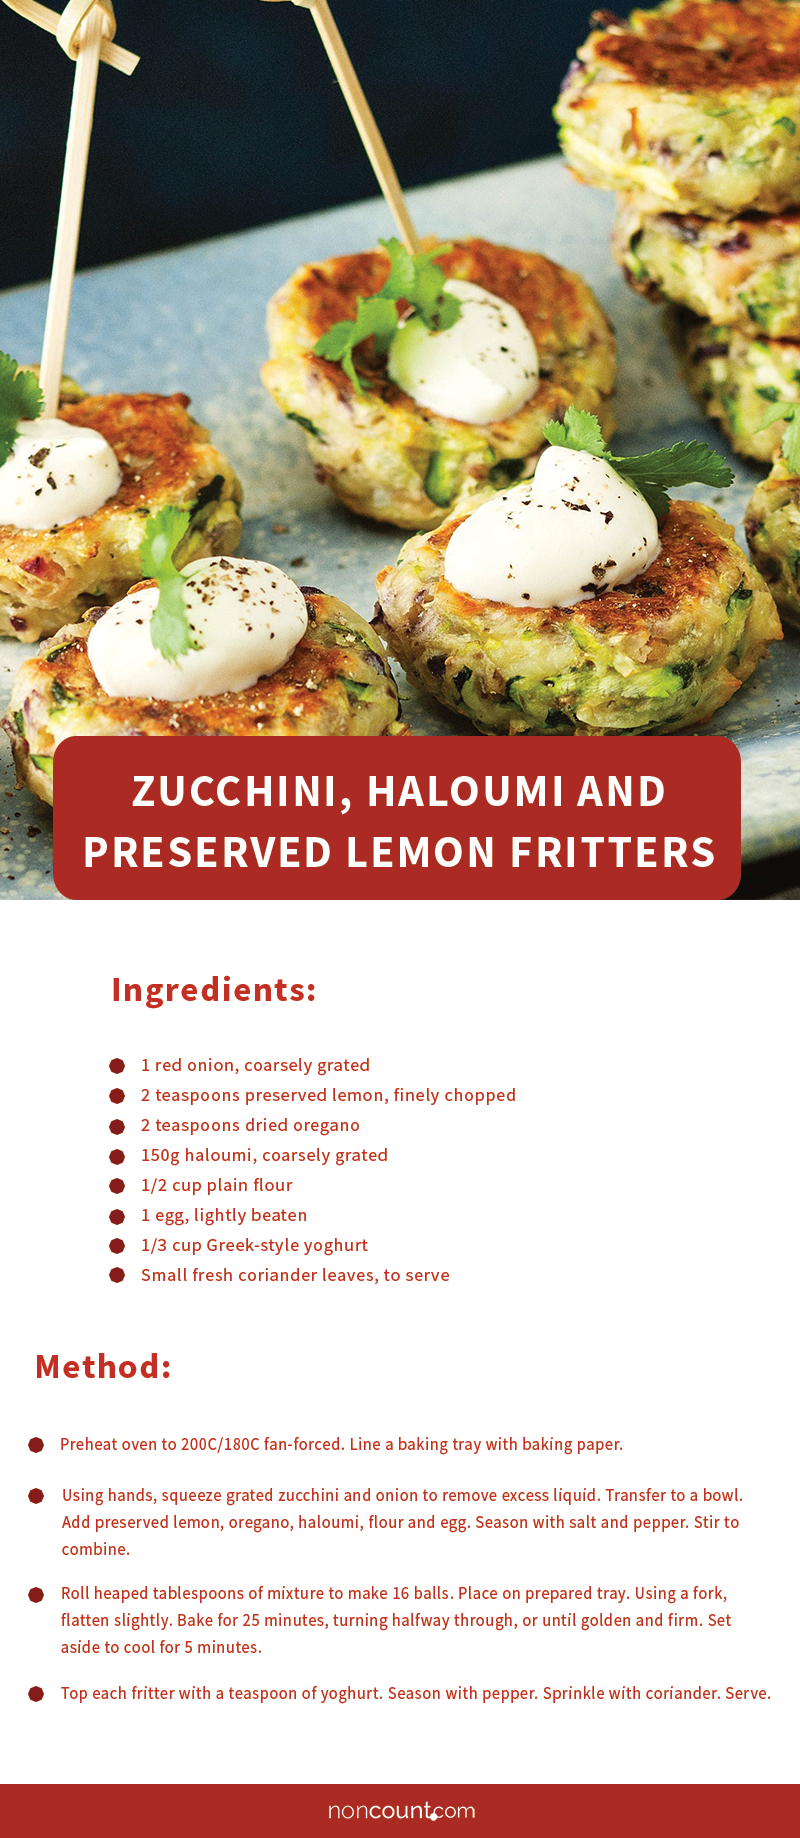 Zucchini, Haloumi and Preserved Lemon Fritters